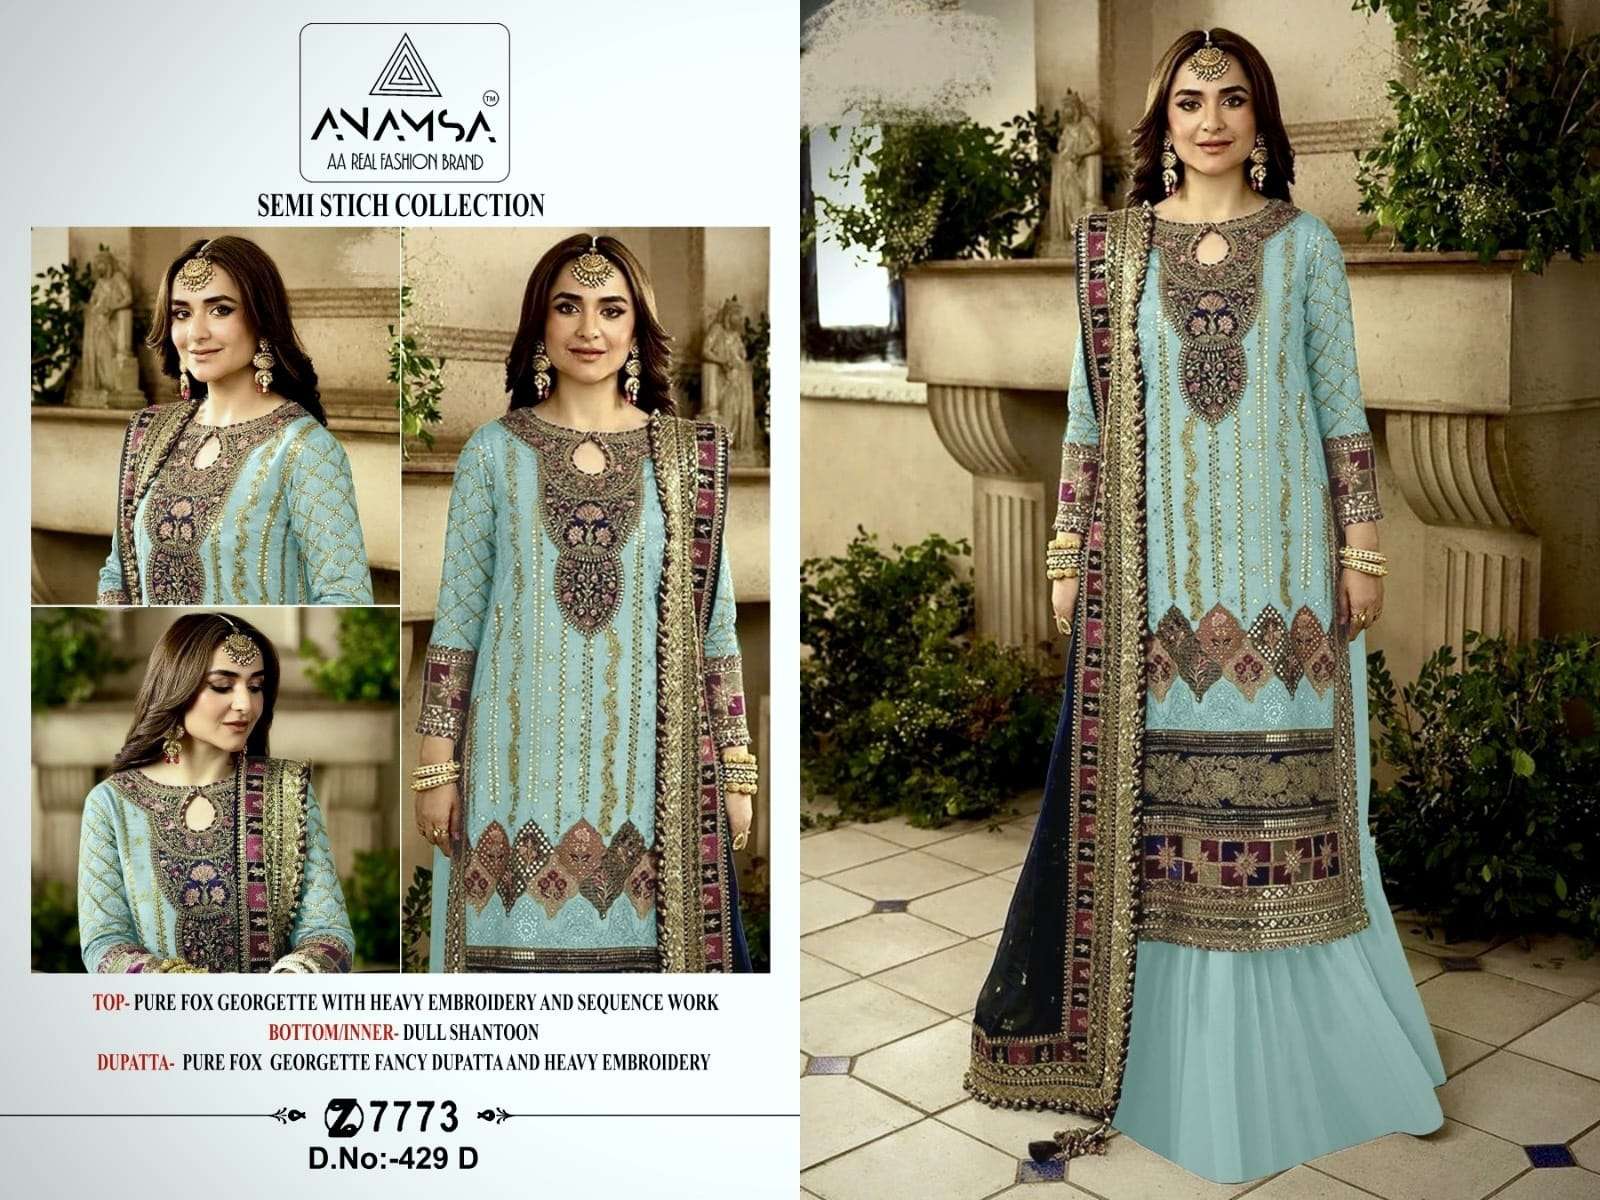 ANAMSA 429 GEORGETTE WITH EMBROIDERY WORK PAKISTANI SUITS CO...